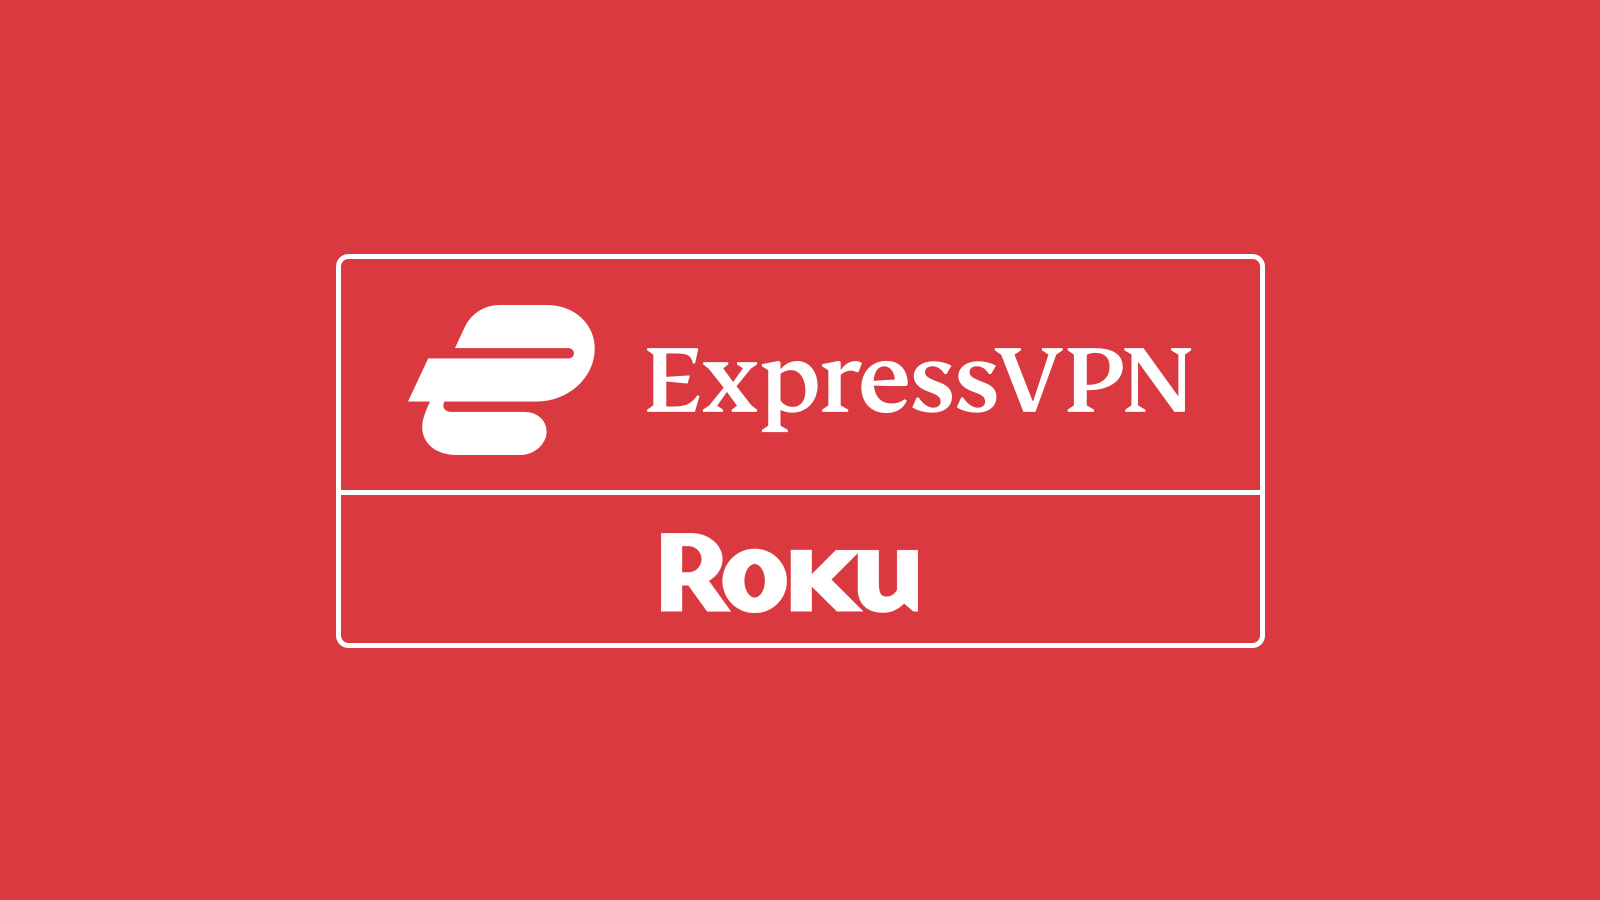 How to Download, Install and Use ExpressVPN on Roku